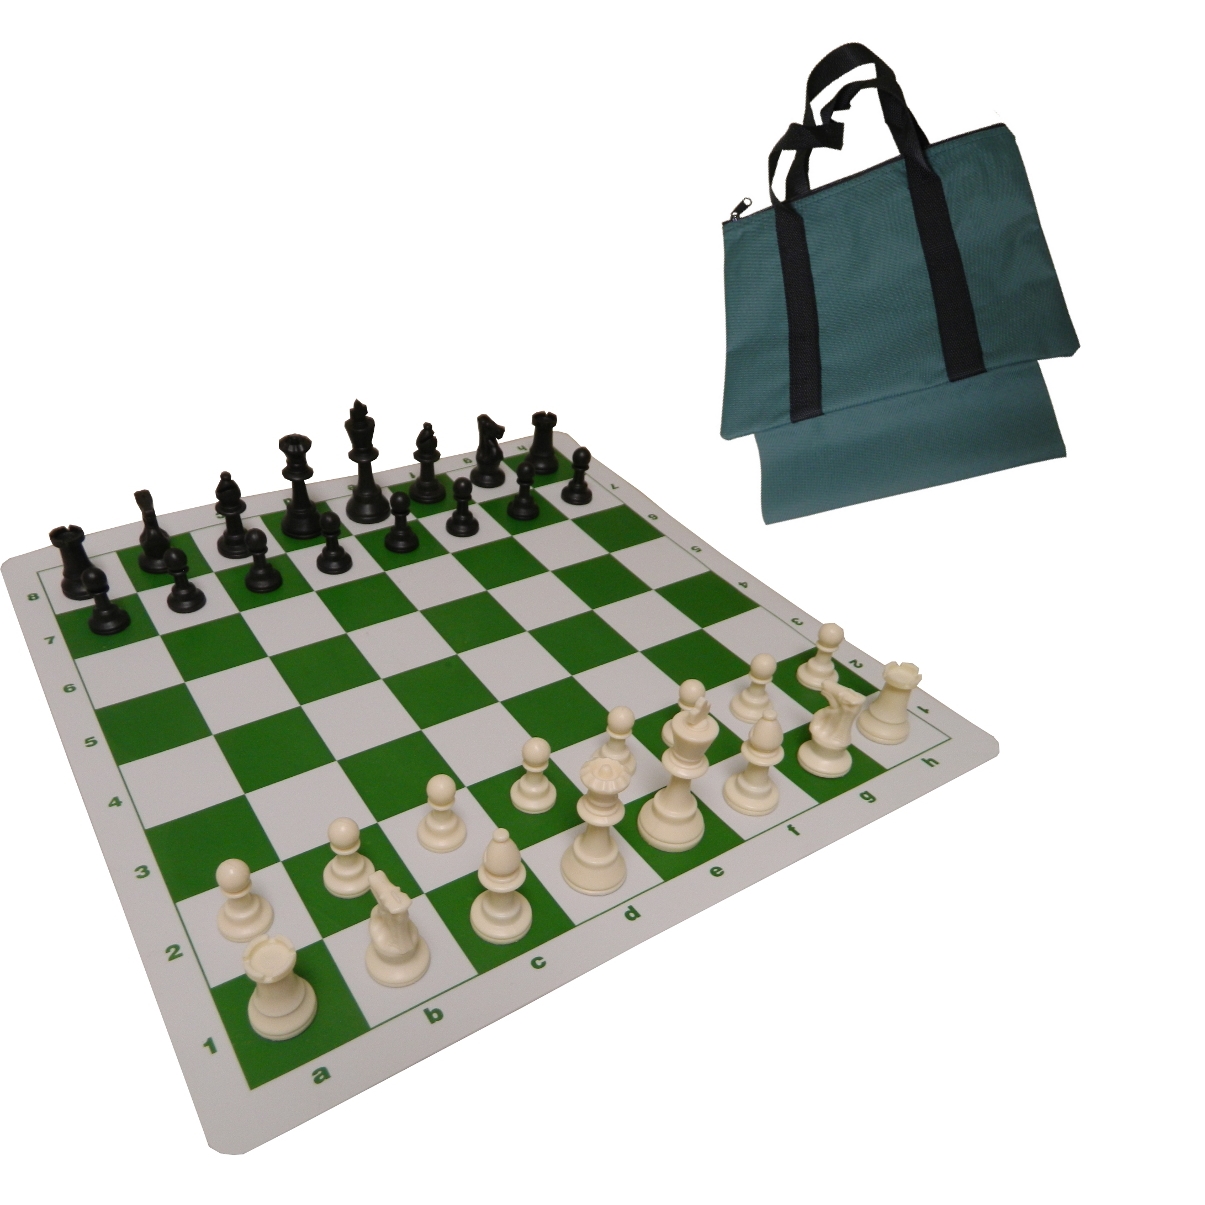 Tournament Chess SET 2 extra Queens Vinyl Board Bag in green color NEW 